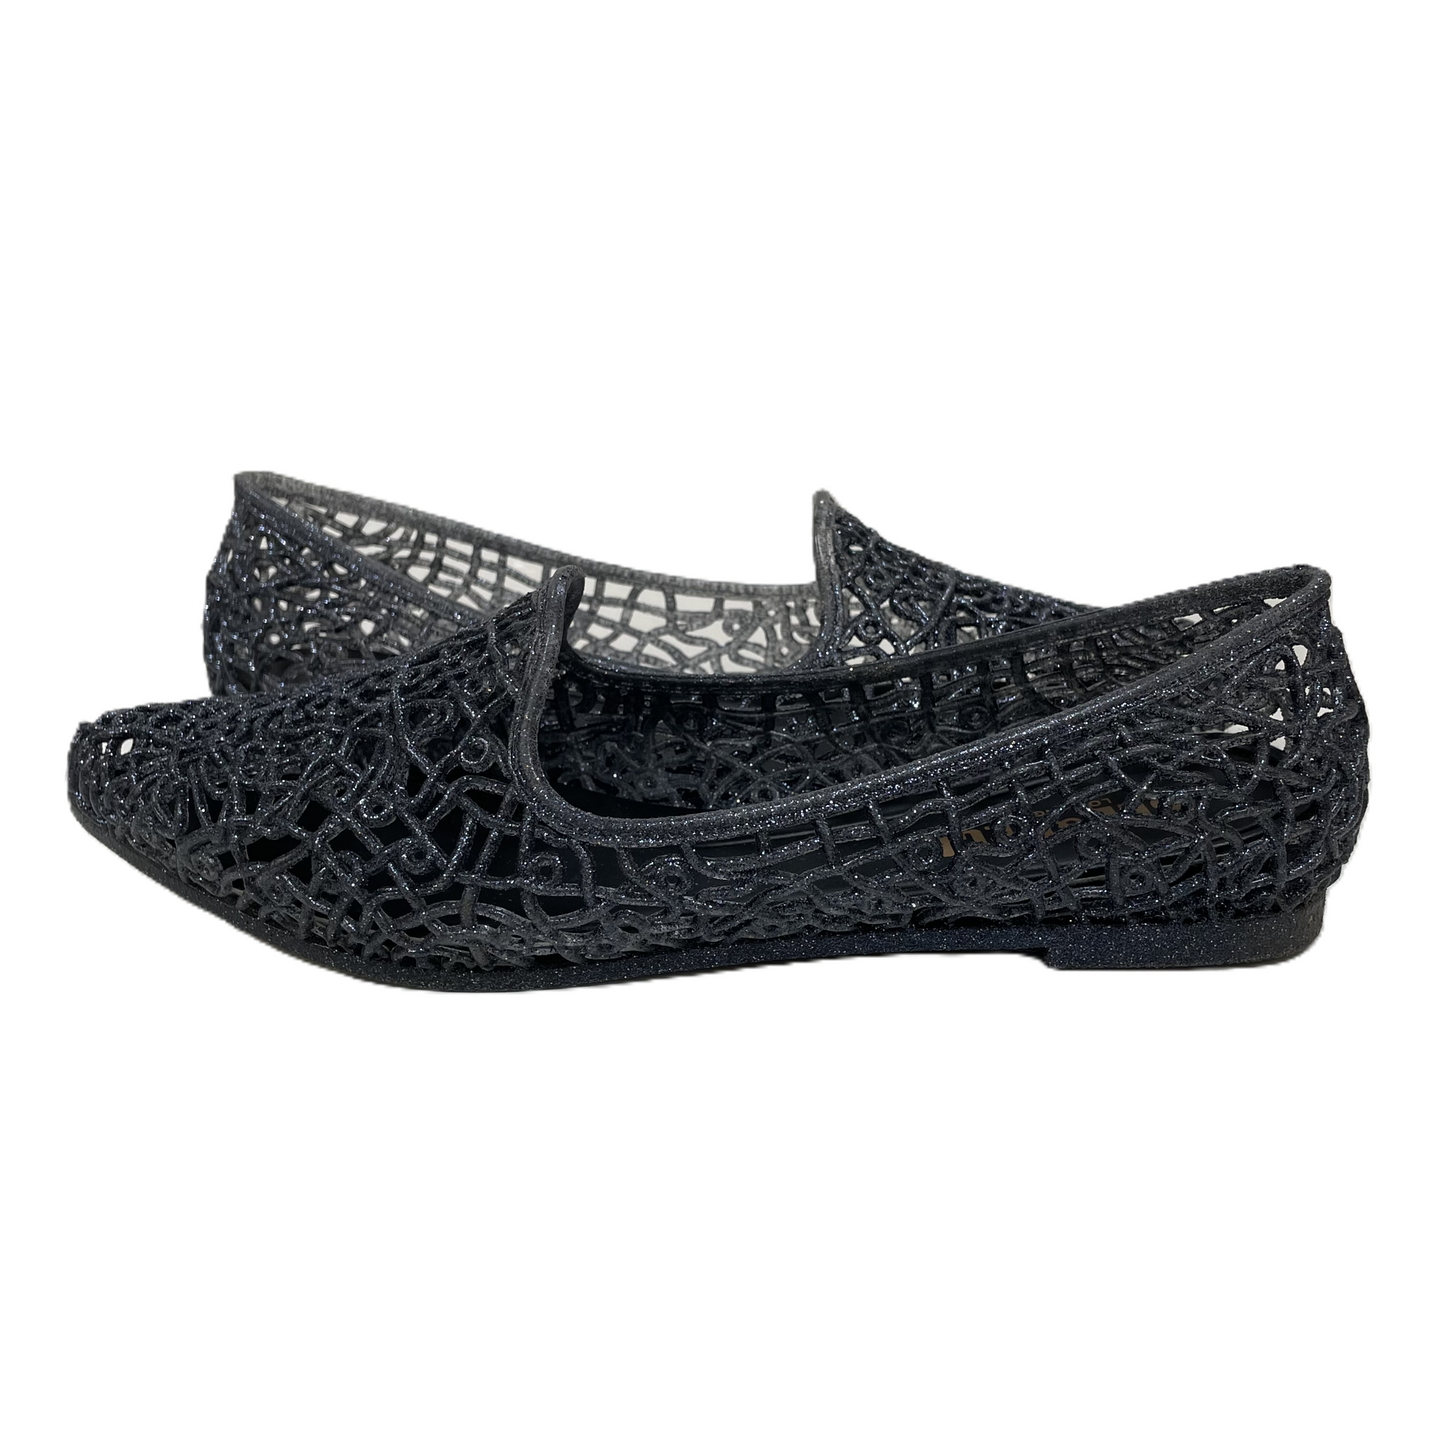 Blue Shoes Flats By Bee & Ceci, Size: 7